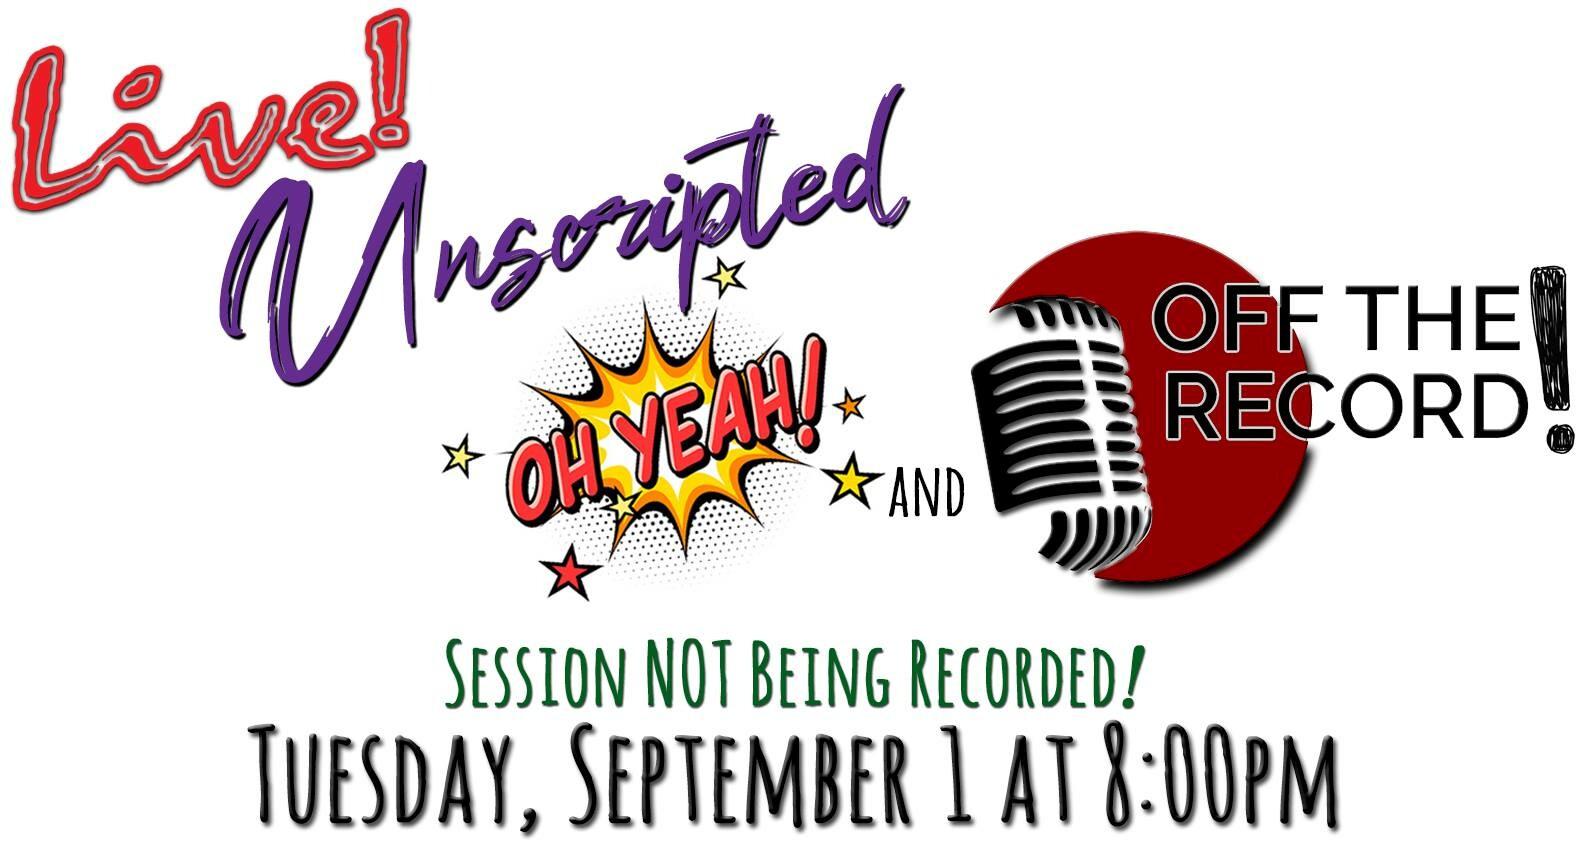 Live, Unscripted, Off the Record...& NOT Recorded!